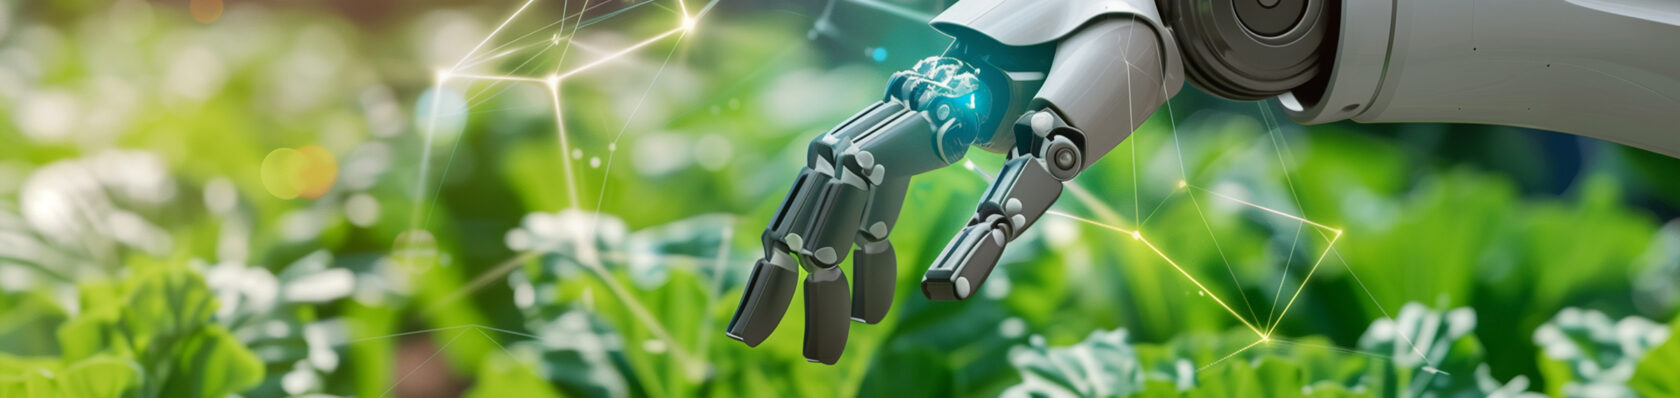 Robotic Hand Touching Green Plant